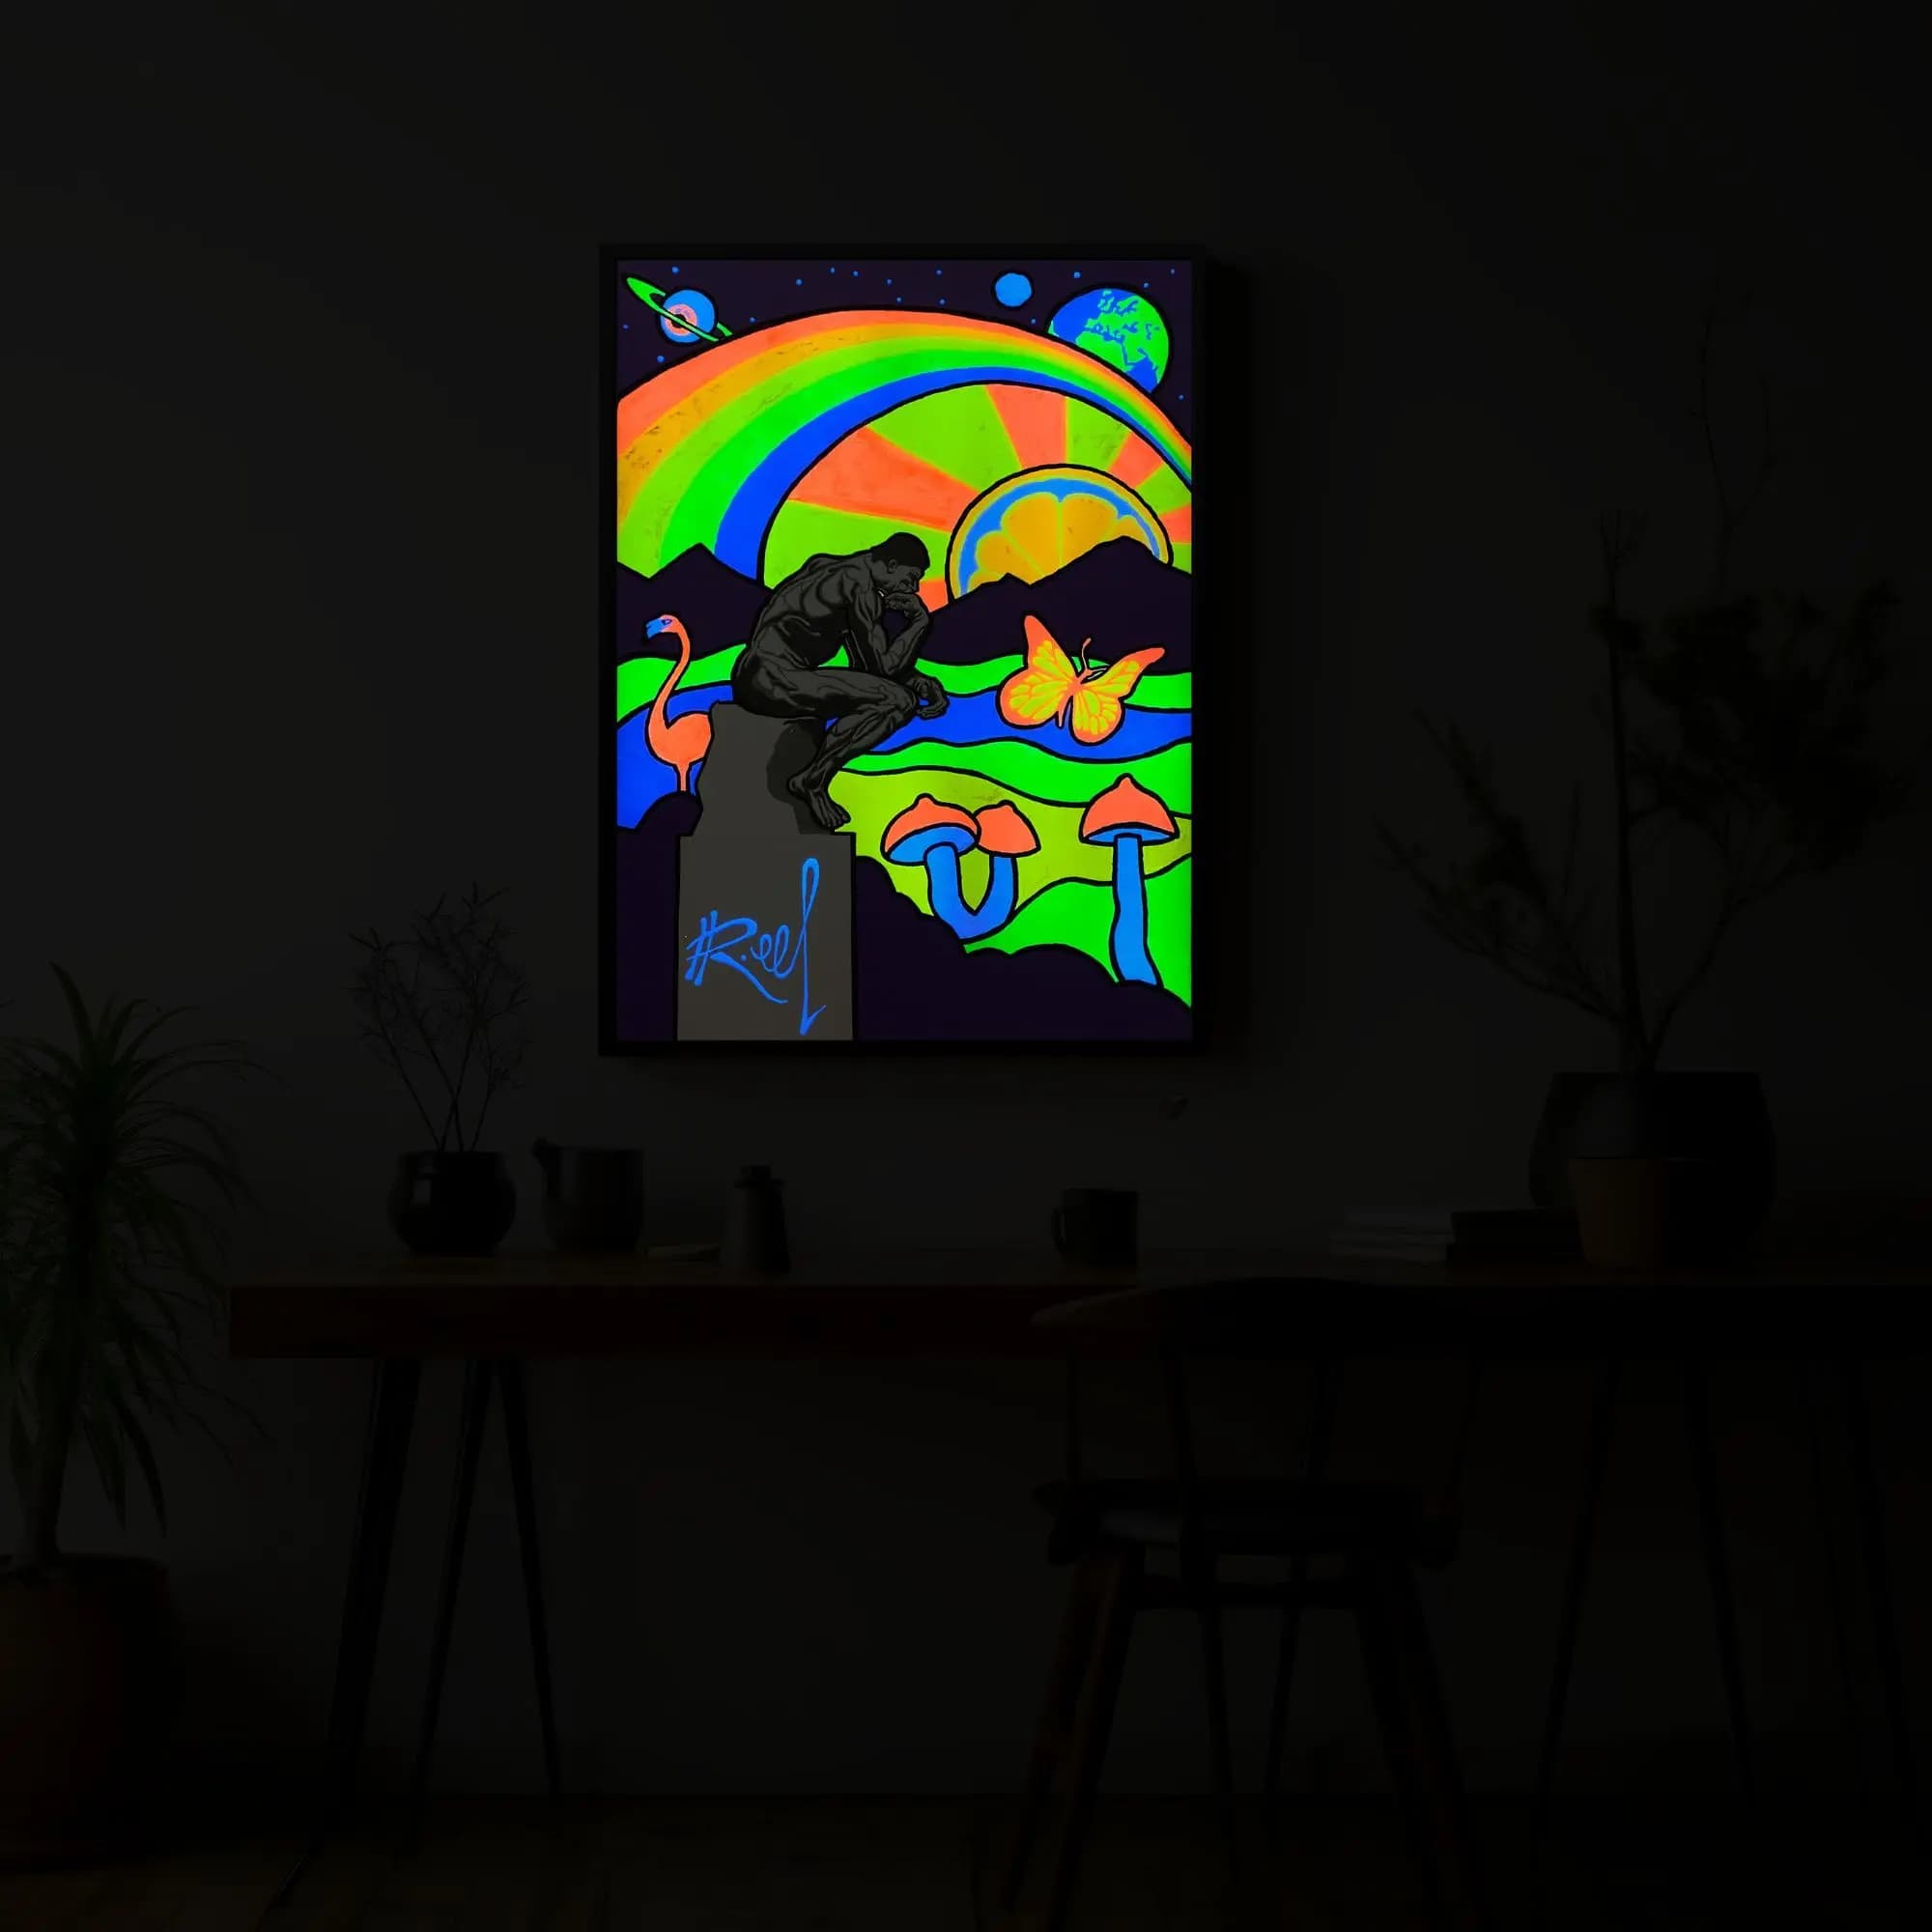 50x70cm Canvas Art Above Work Desk - Night Glow: The Thinker - A unique accent for your creative space.